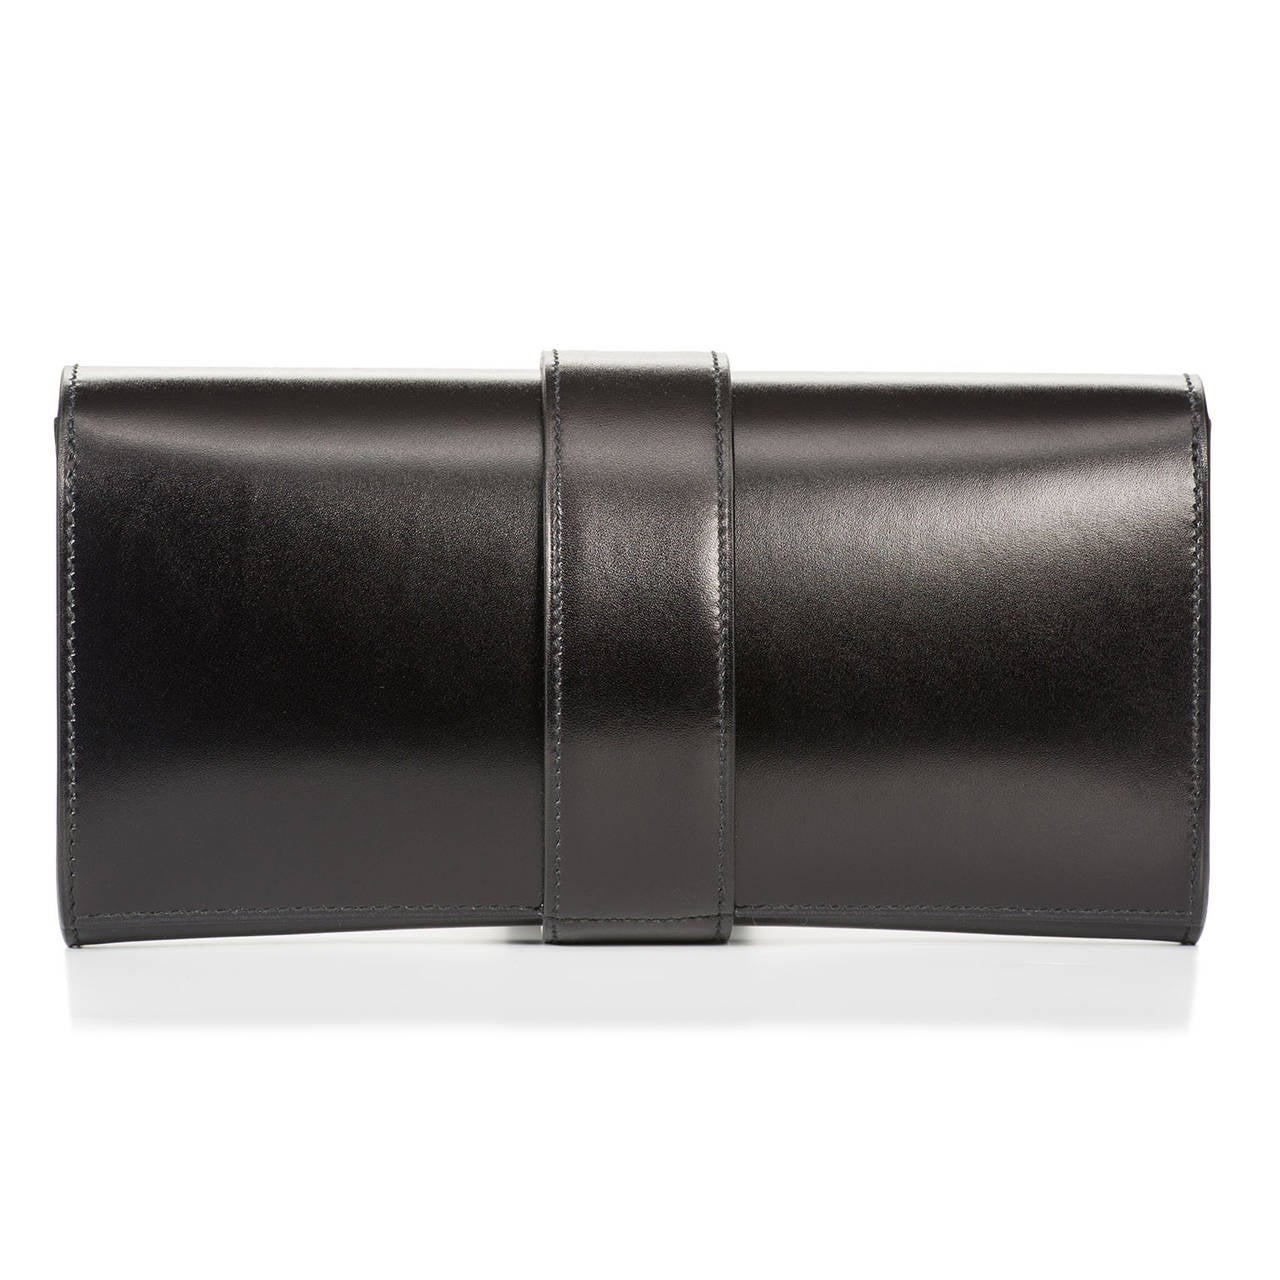 Ultra-cool design for edgy look!

Medor black box leather with palladium hardware